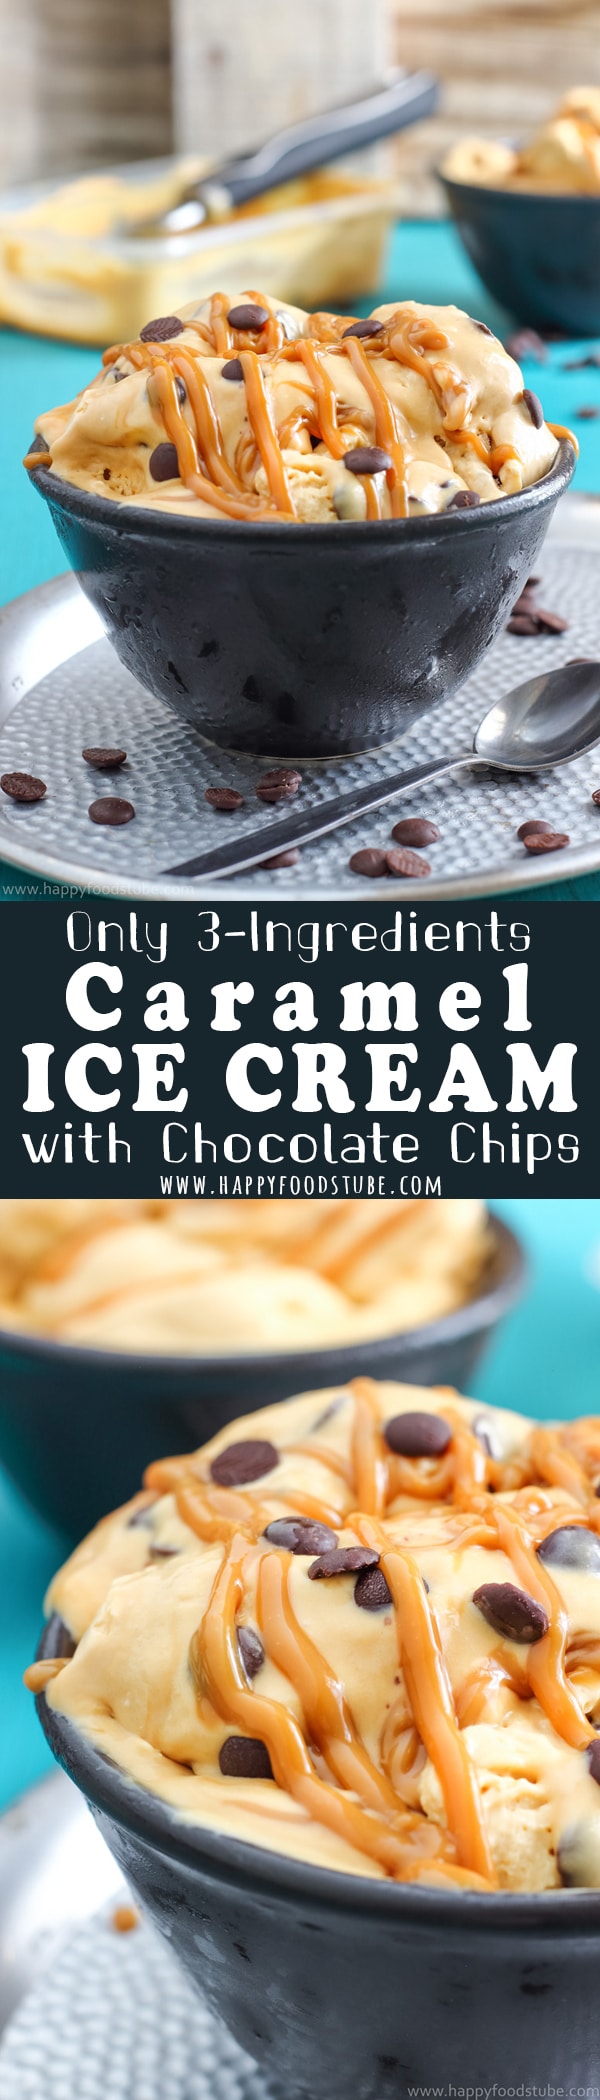 Homemade Caramel Ice Cream with Chocolate Chips - Happy Foods Tube